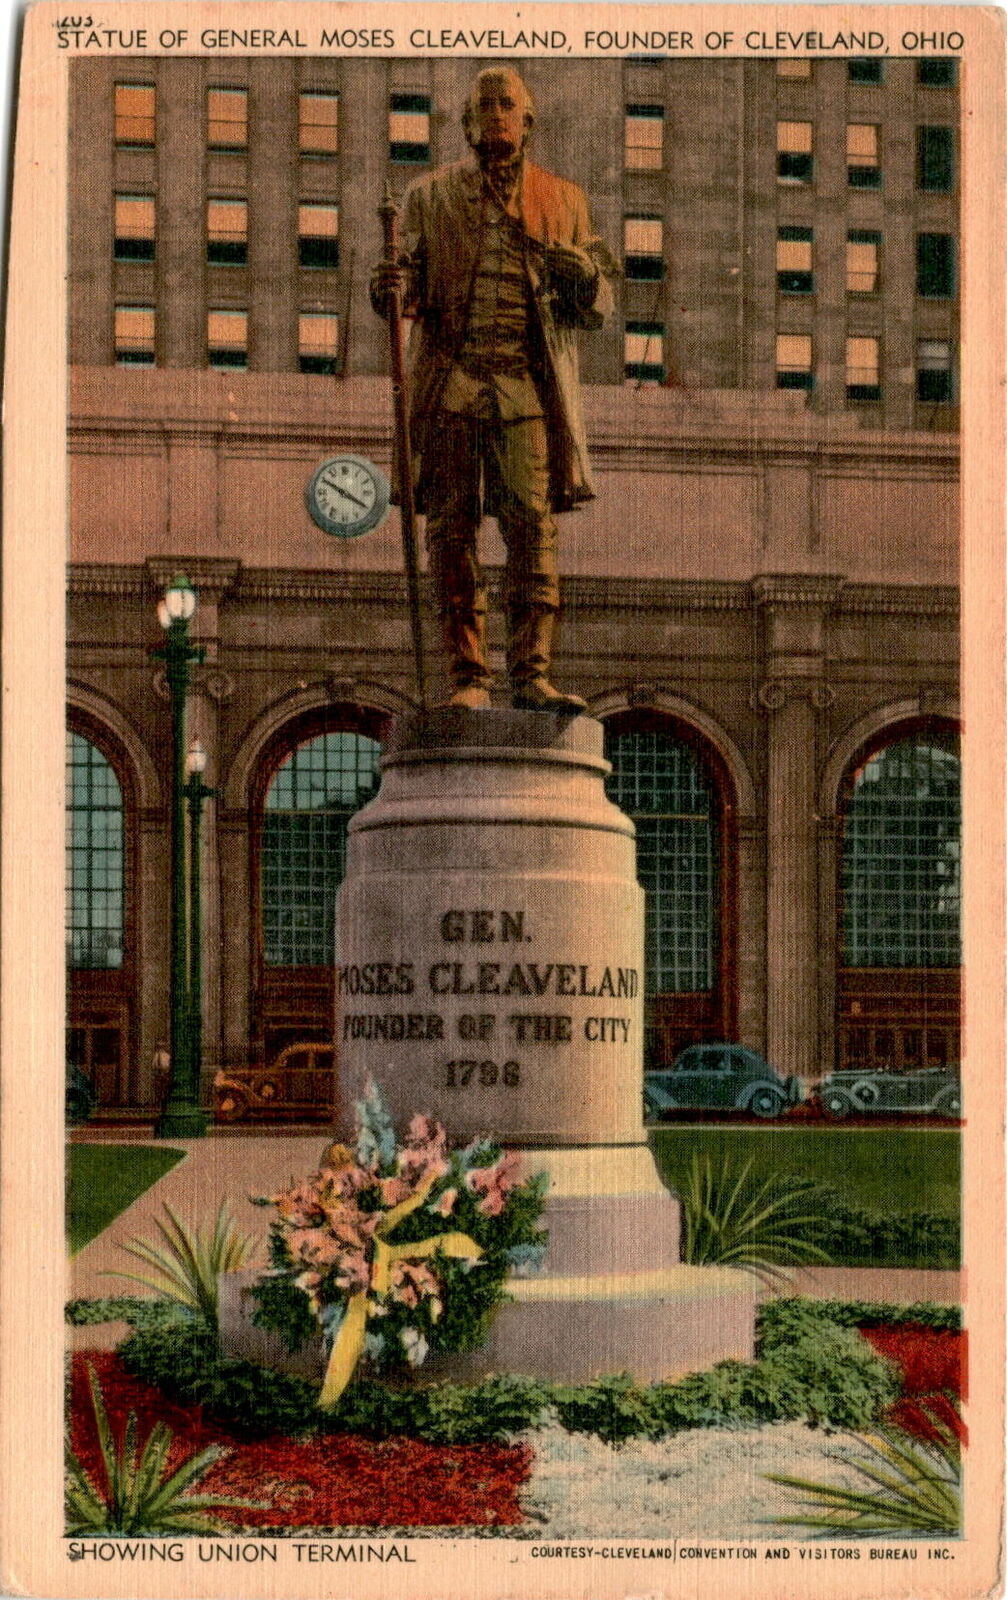 General Moses Cleaveland, Cleveland, Ohio, statue, founder, 1796, Postcard